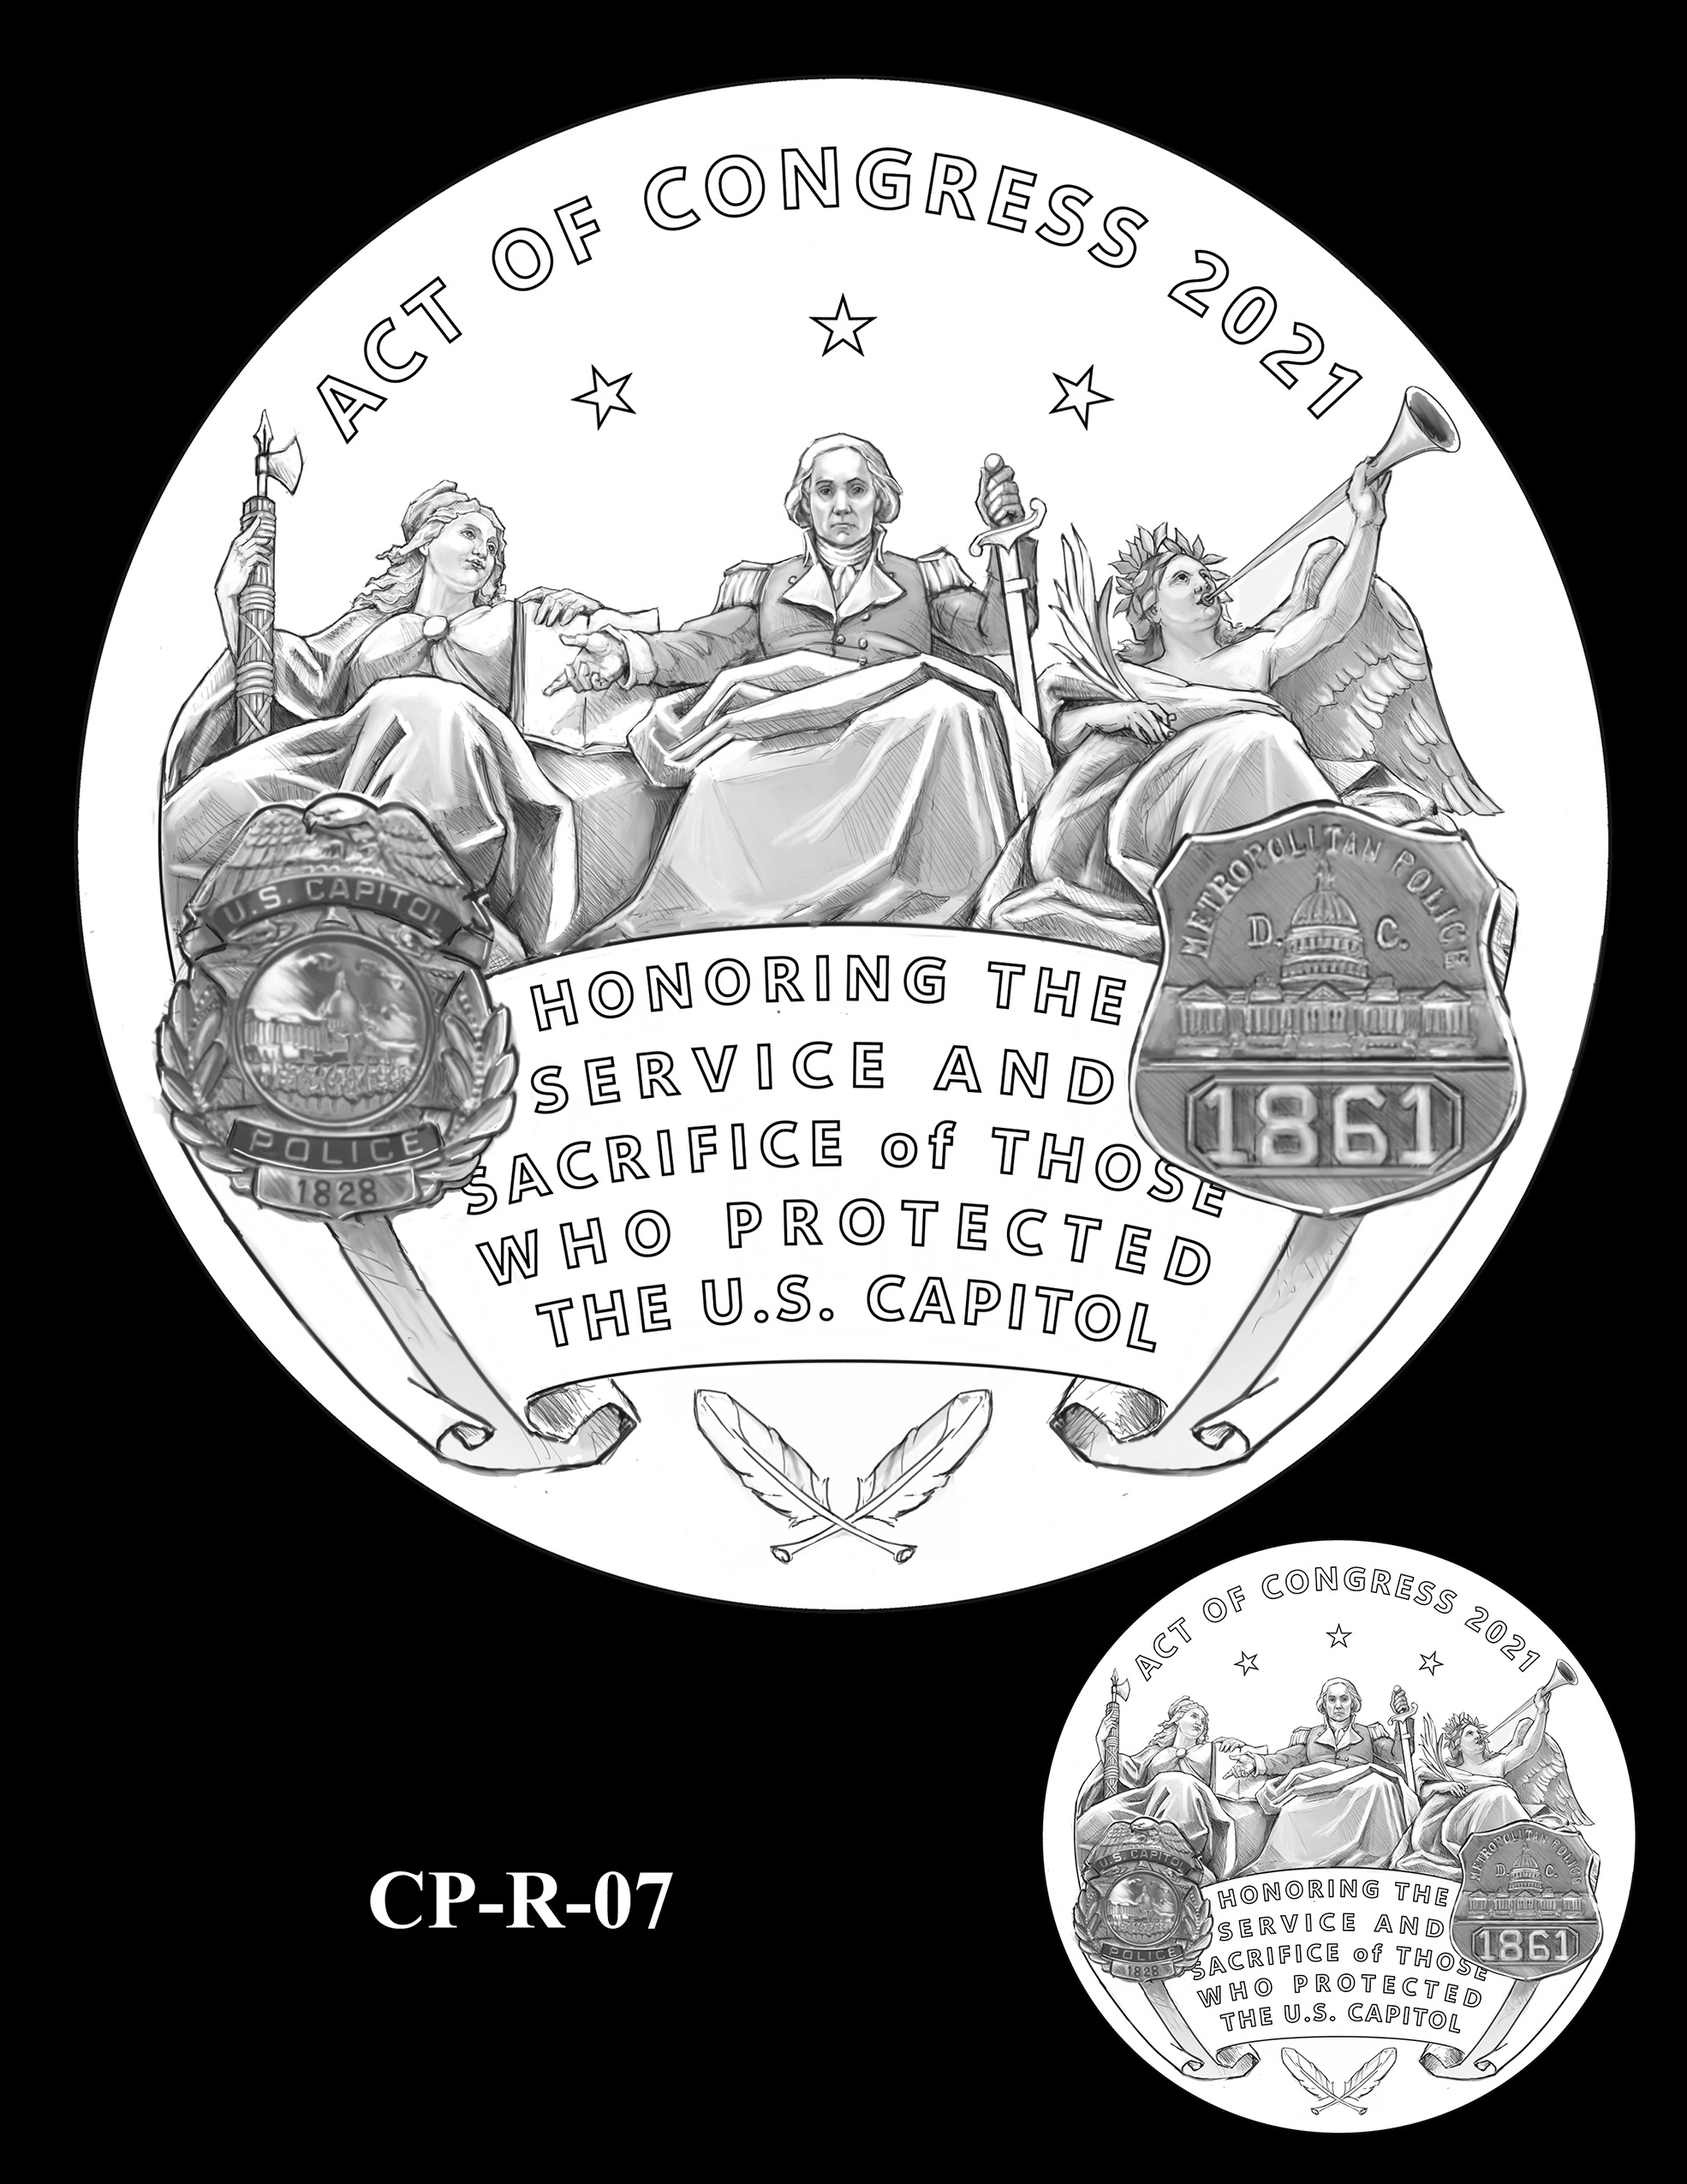 CP-R-07 -- Congressional Gold Medal for Those Who Protected the U.S. Capitol on January 6th 2021